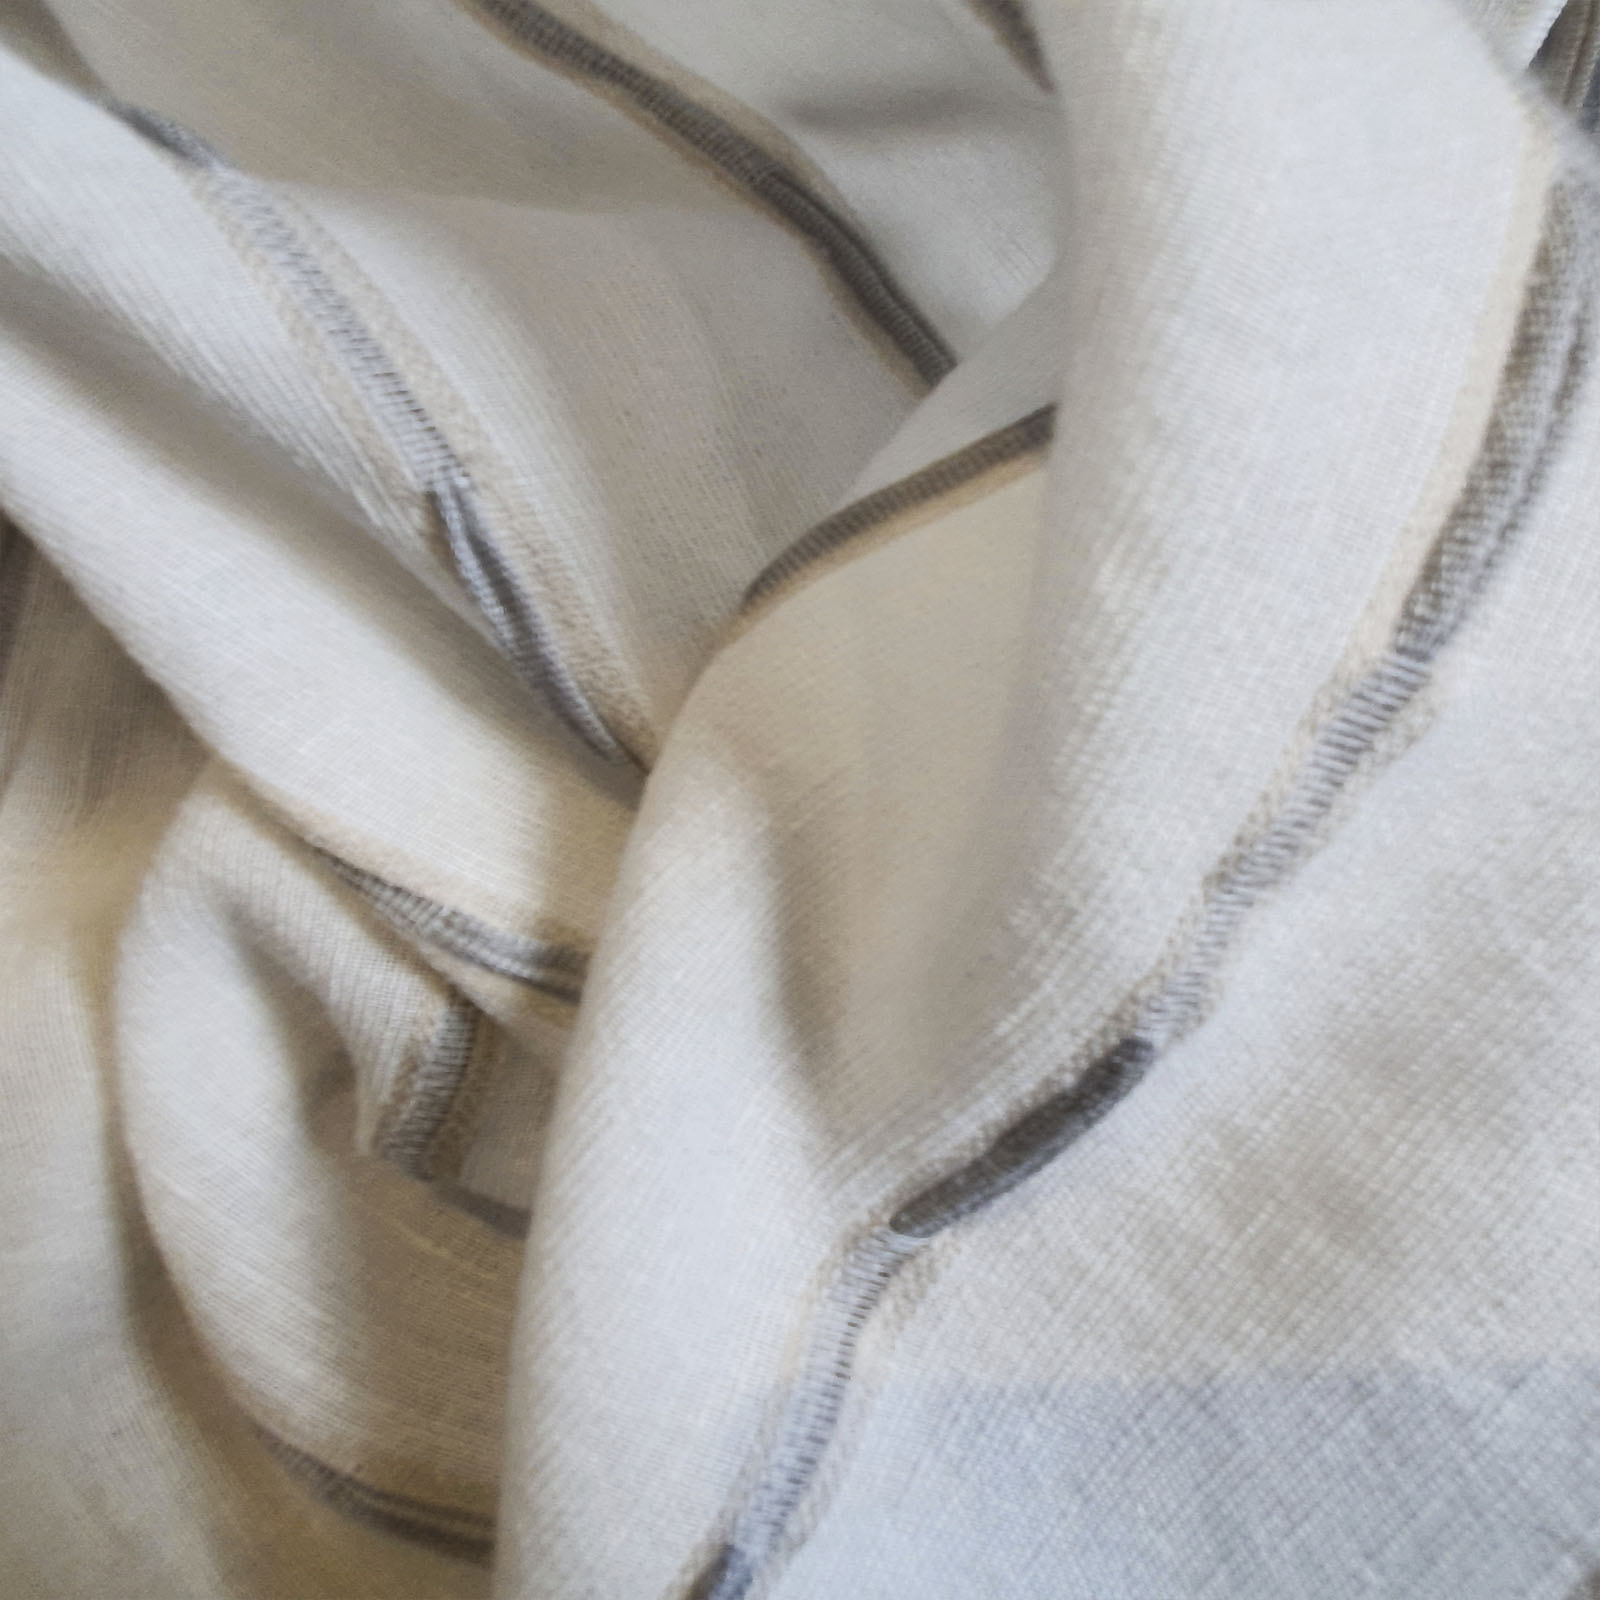 GP20266 PLISSE' AIRON FETTUCCIA 60%PL 40%LIN W. 320CM
Linen blend jacquard 3d plisseè with sewing wffect.<br /> 100% Made in Italy fabric. Style modern and trendy with plain, jacquard structures, small drawings and stripes decorations.

 Treatments: antibacterial, embossing 3D effect and soft hand. Type of workings: jacquard and pleated. 